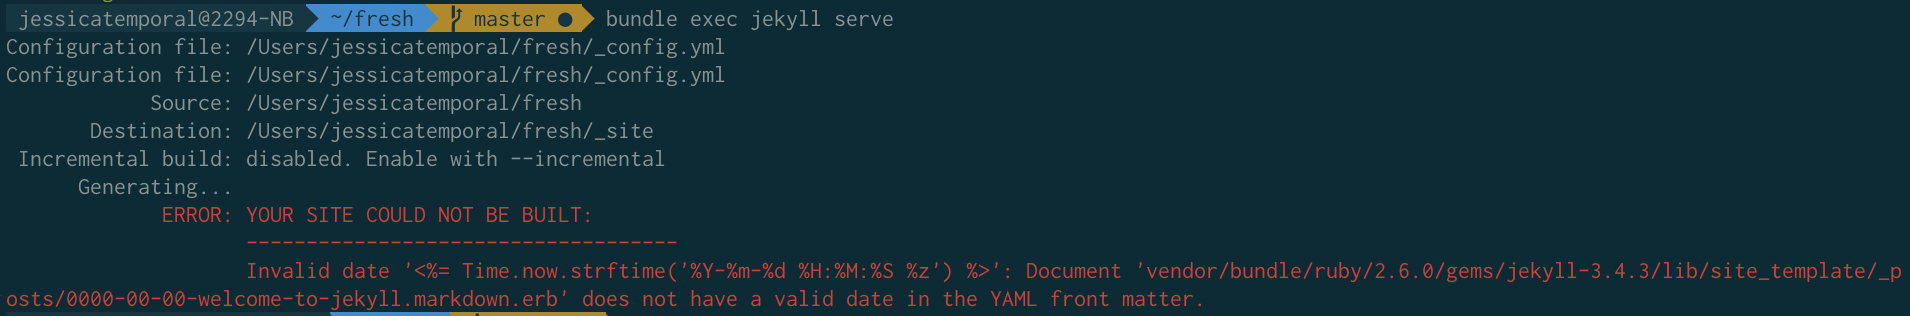 image showing the invalid date error on the terminal